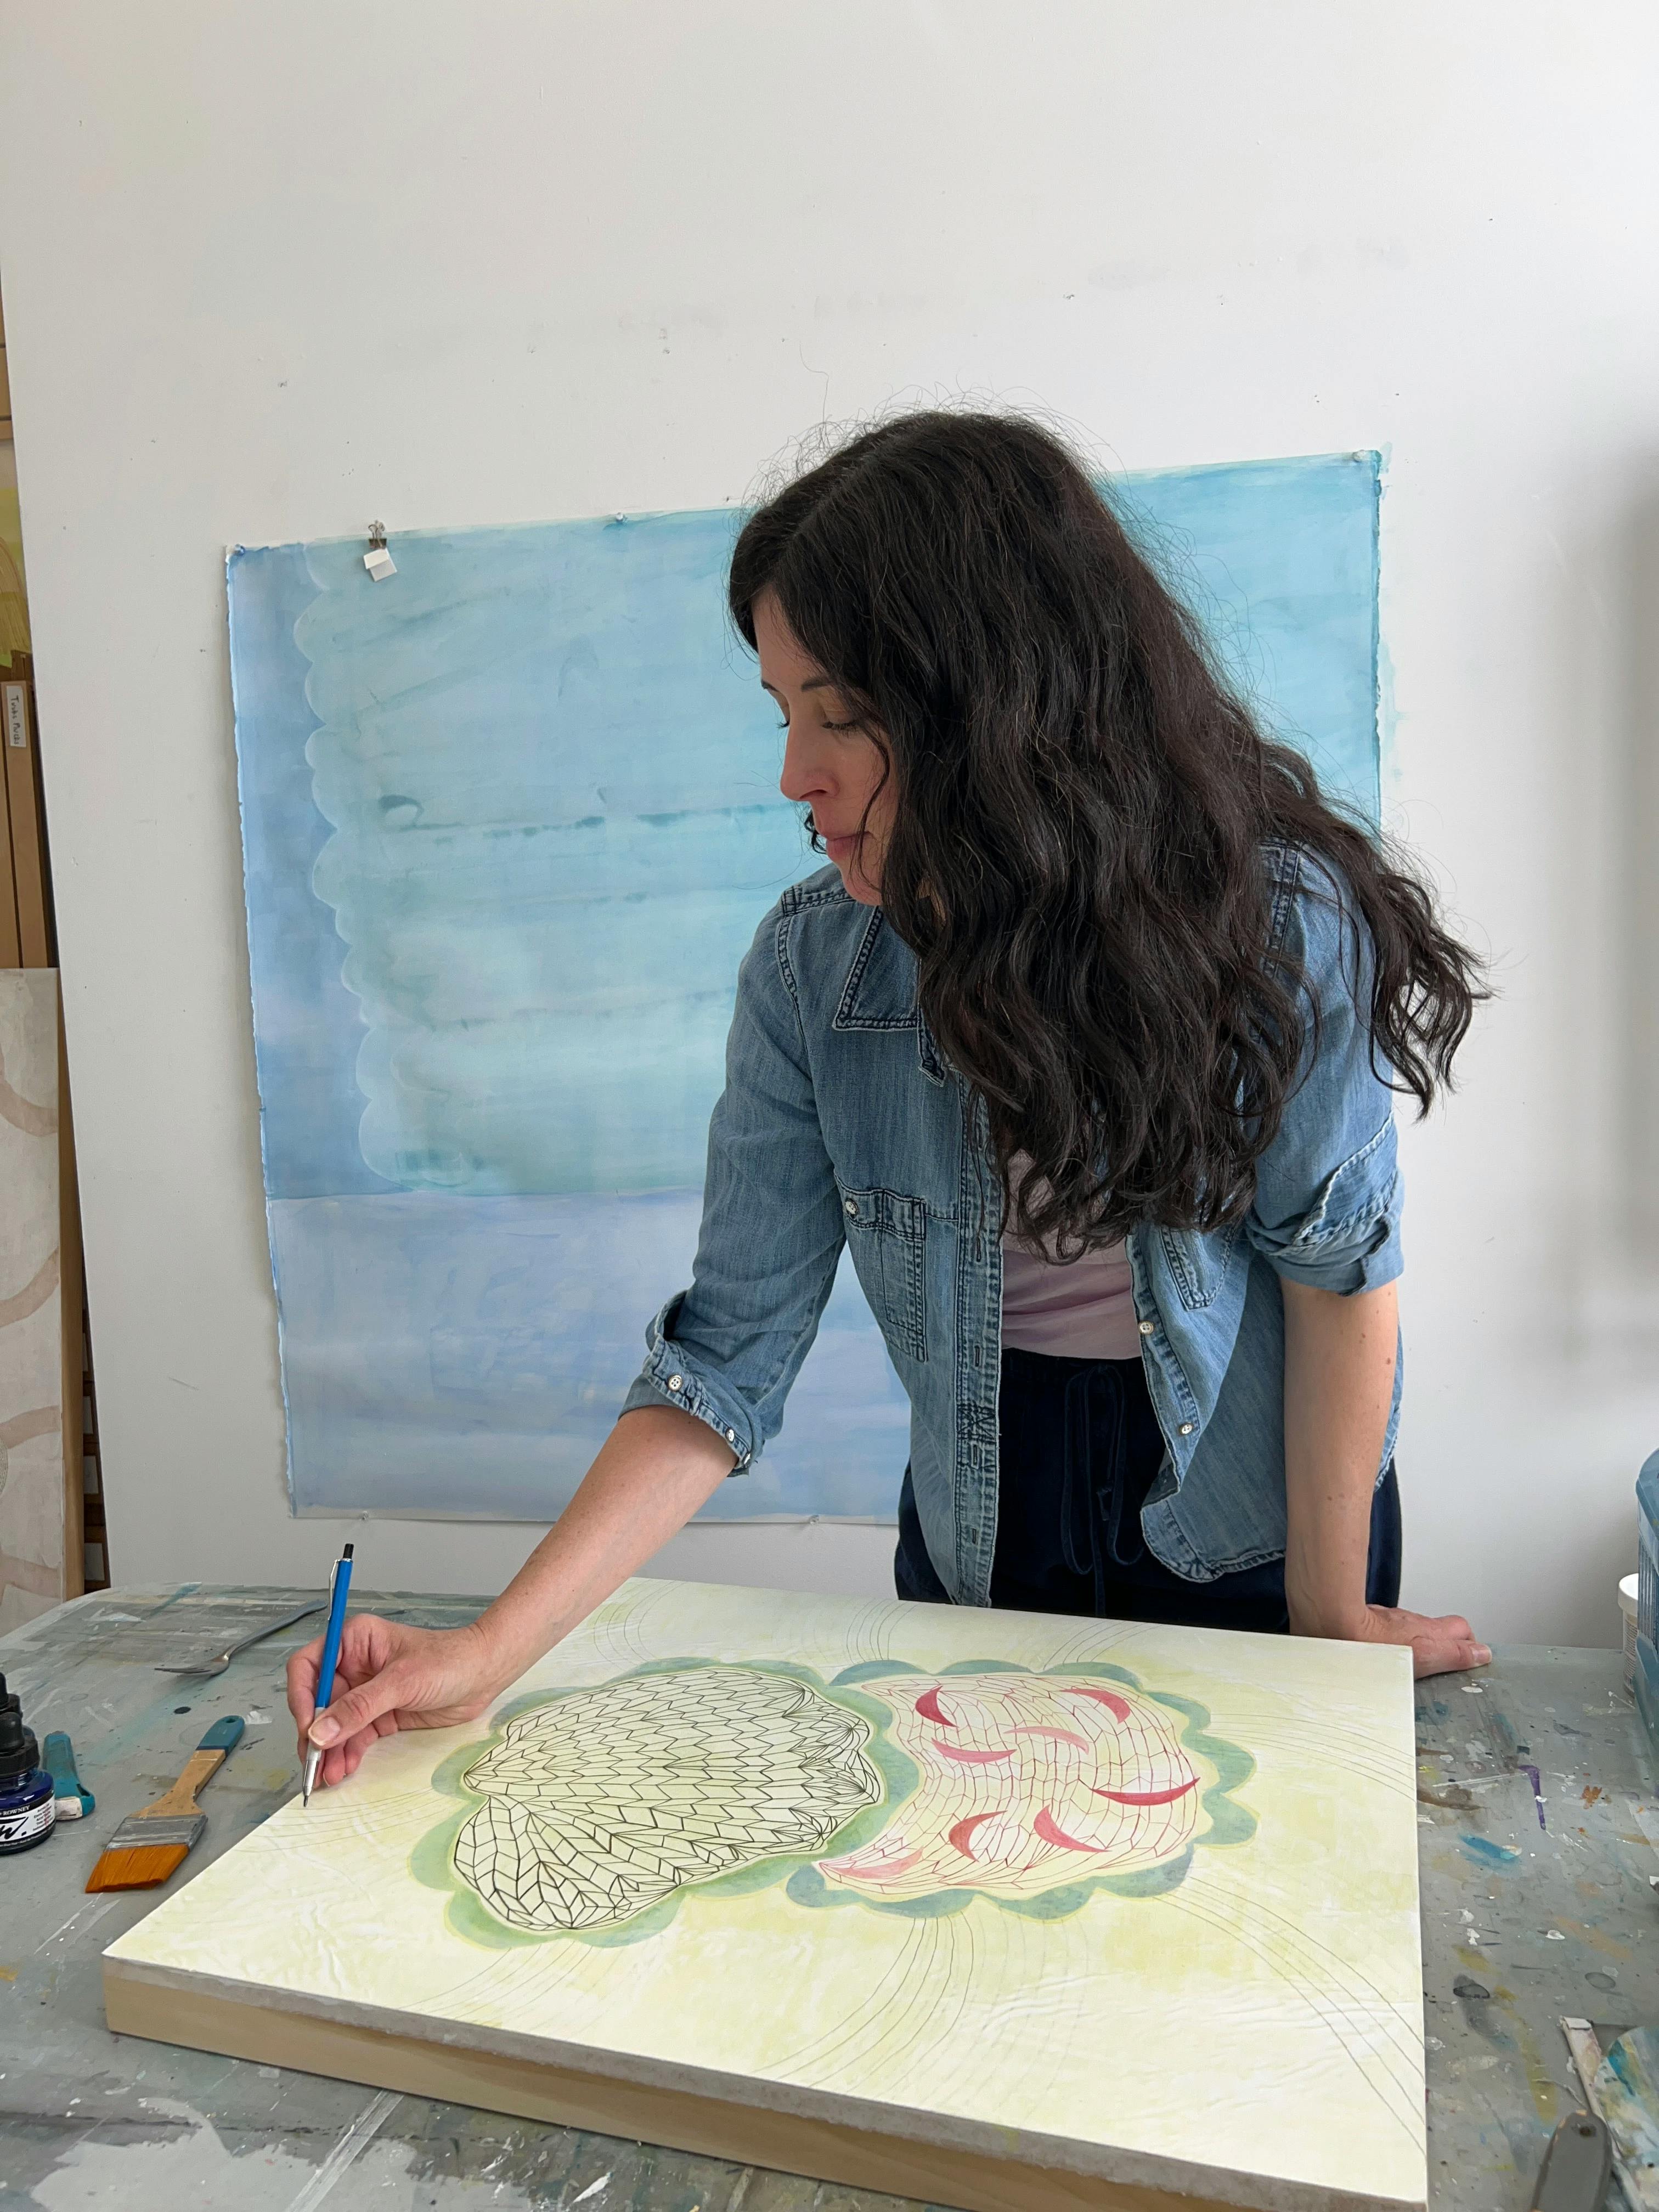 Artist Lydia Bassis standing and using a pencil on a yellow canvas in her studio.